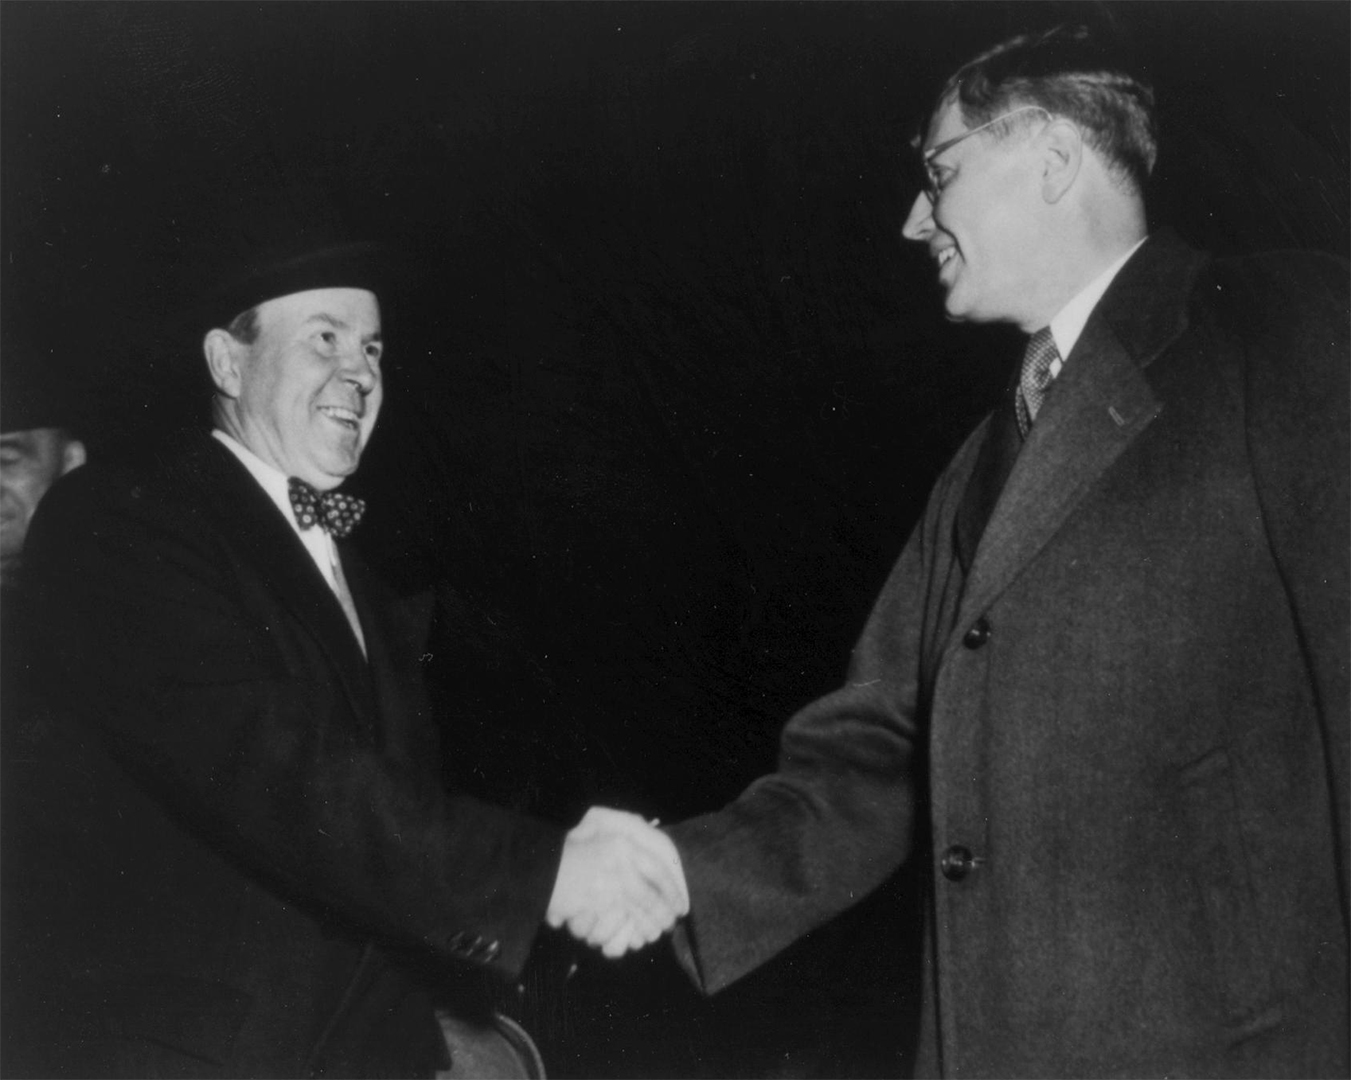 Black and white photograph of Lester B. Pearson and Herbert Norman shaking hands.